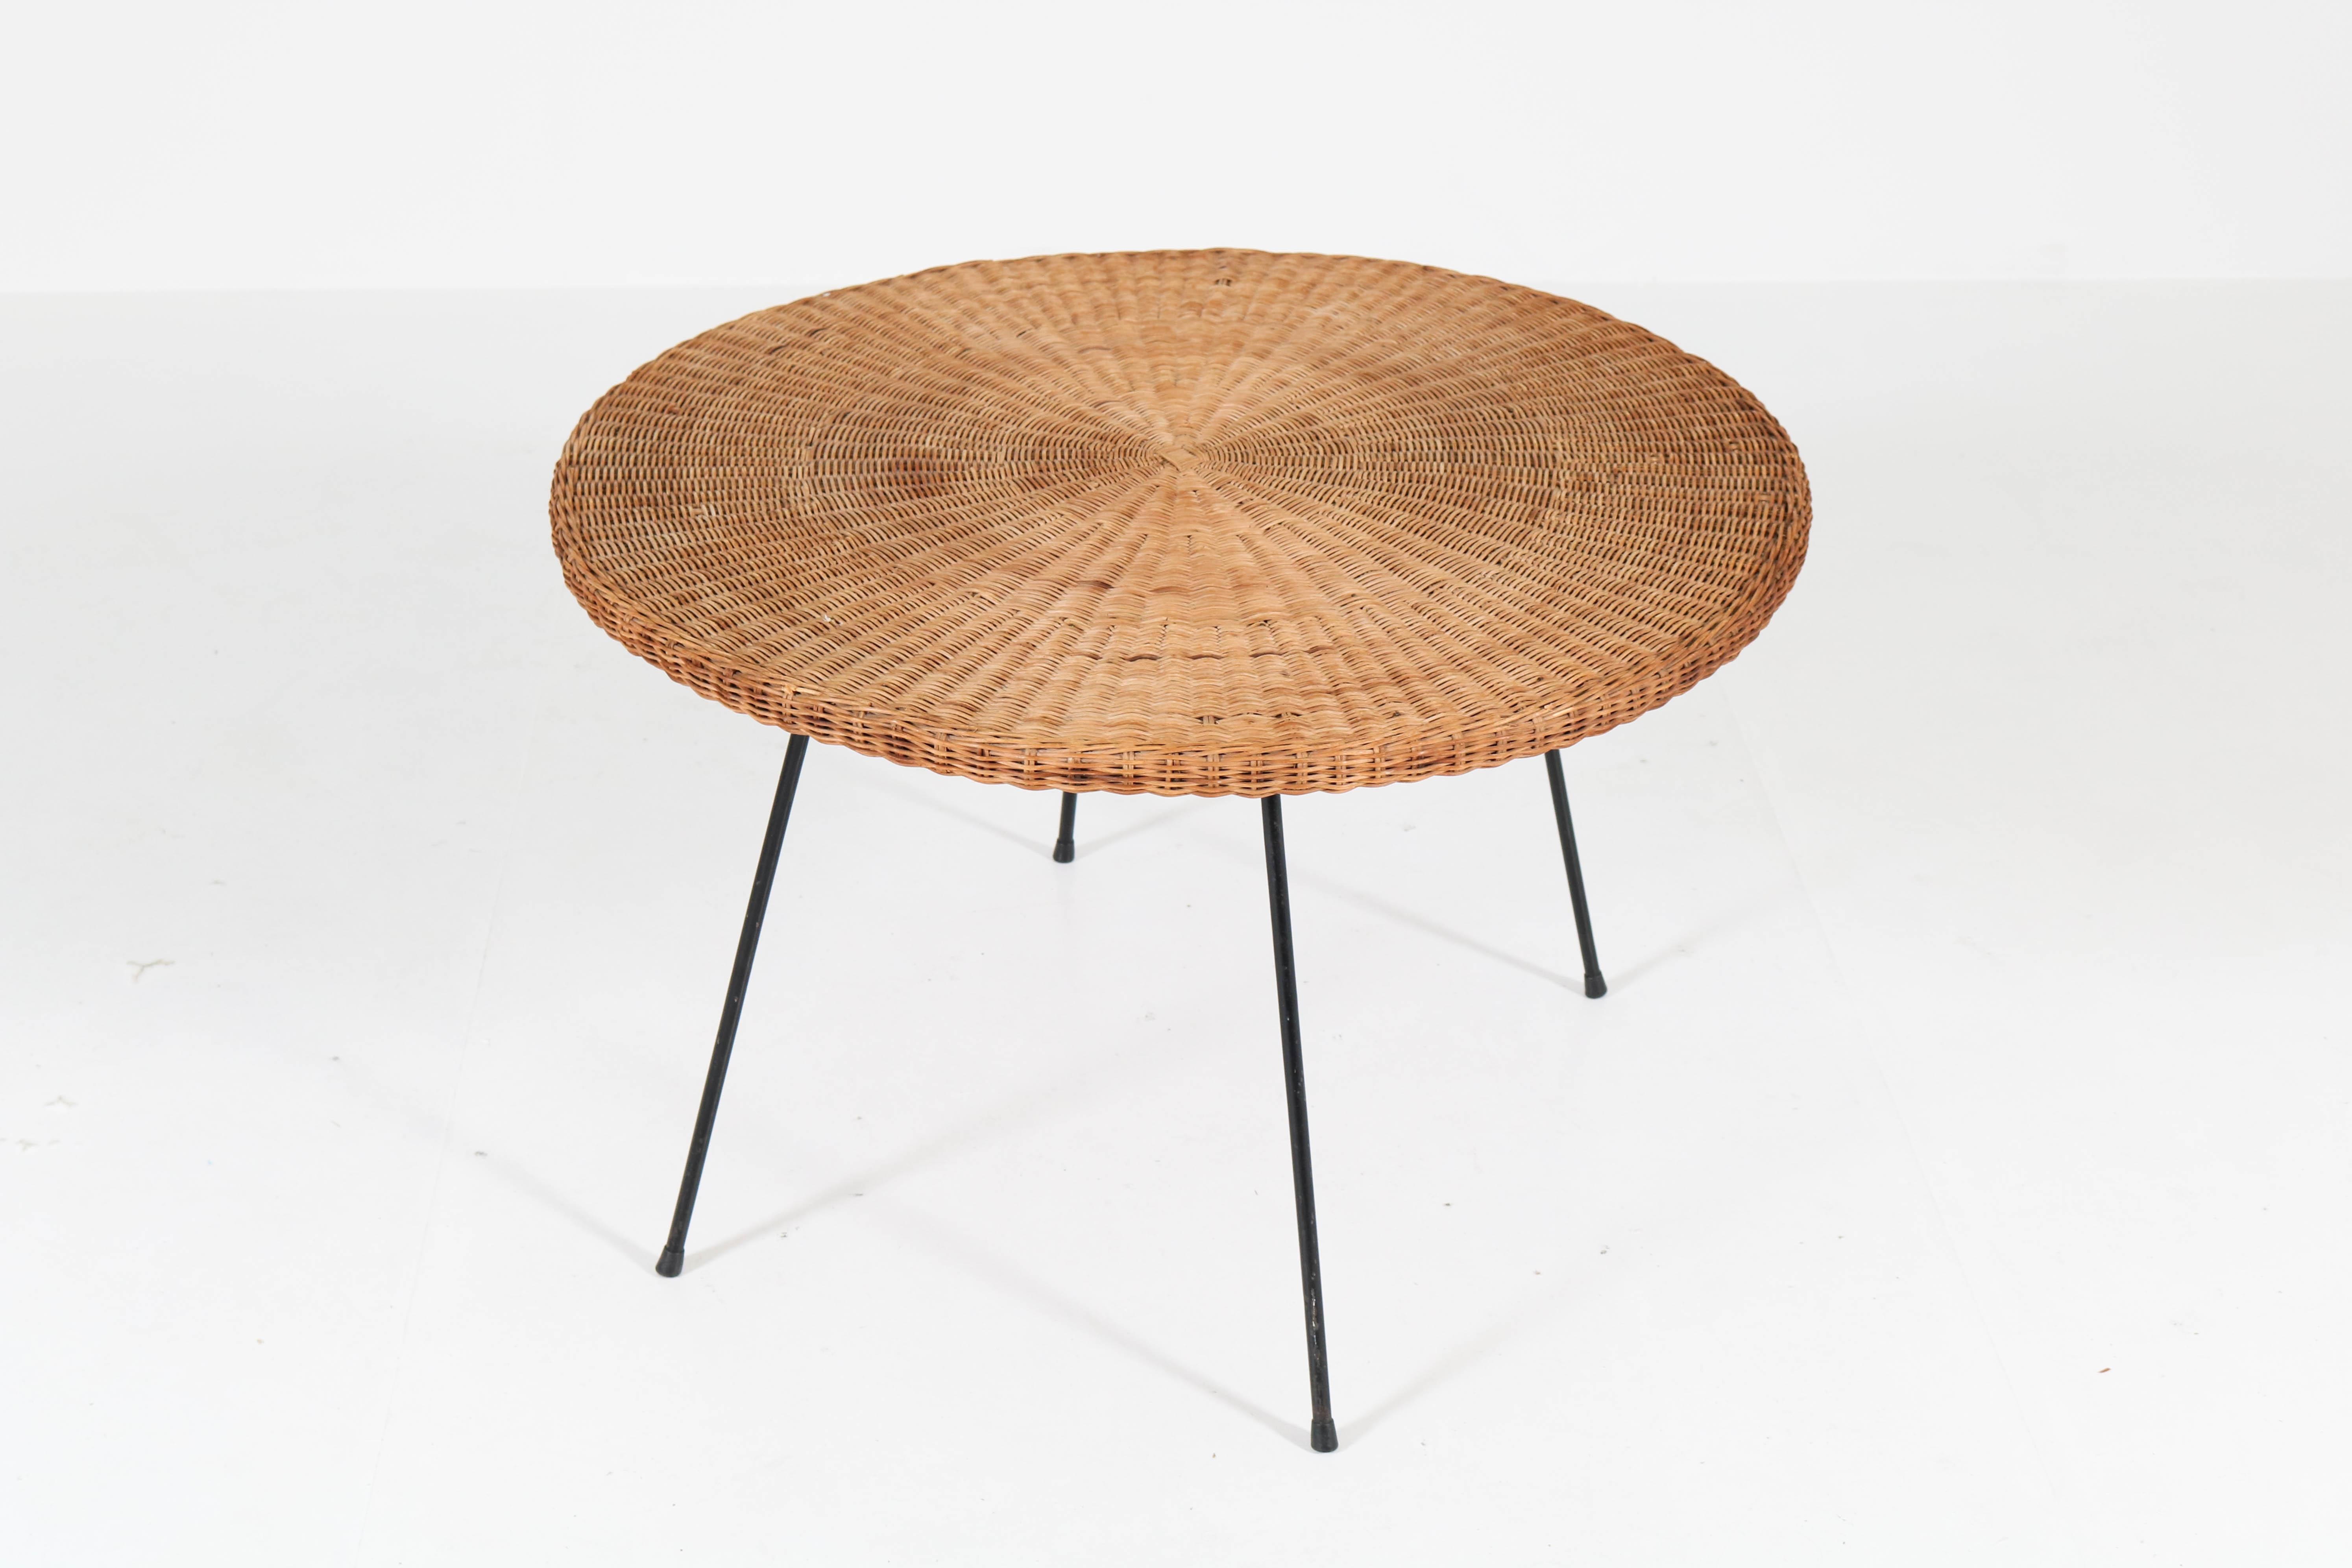 Offered by Amsterdam Modernism:
Stunning French Mid-Century Modern coffee table, 1950s.
In the style of Mathieu Matégot.
Original black lacquered metal legs with original wicker top.
In very good condition with minor wear consistent with age and